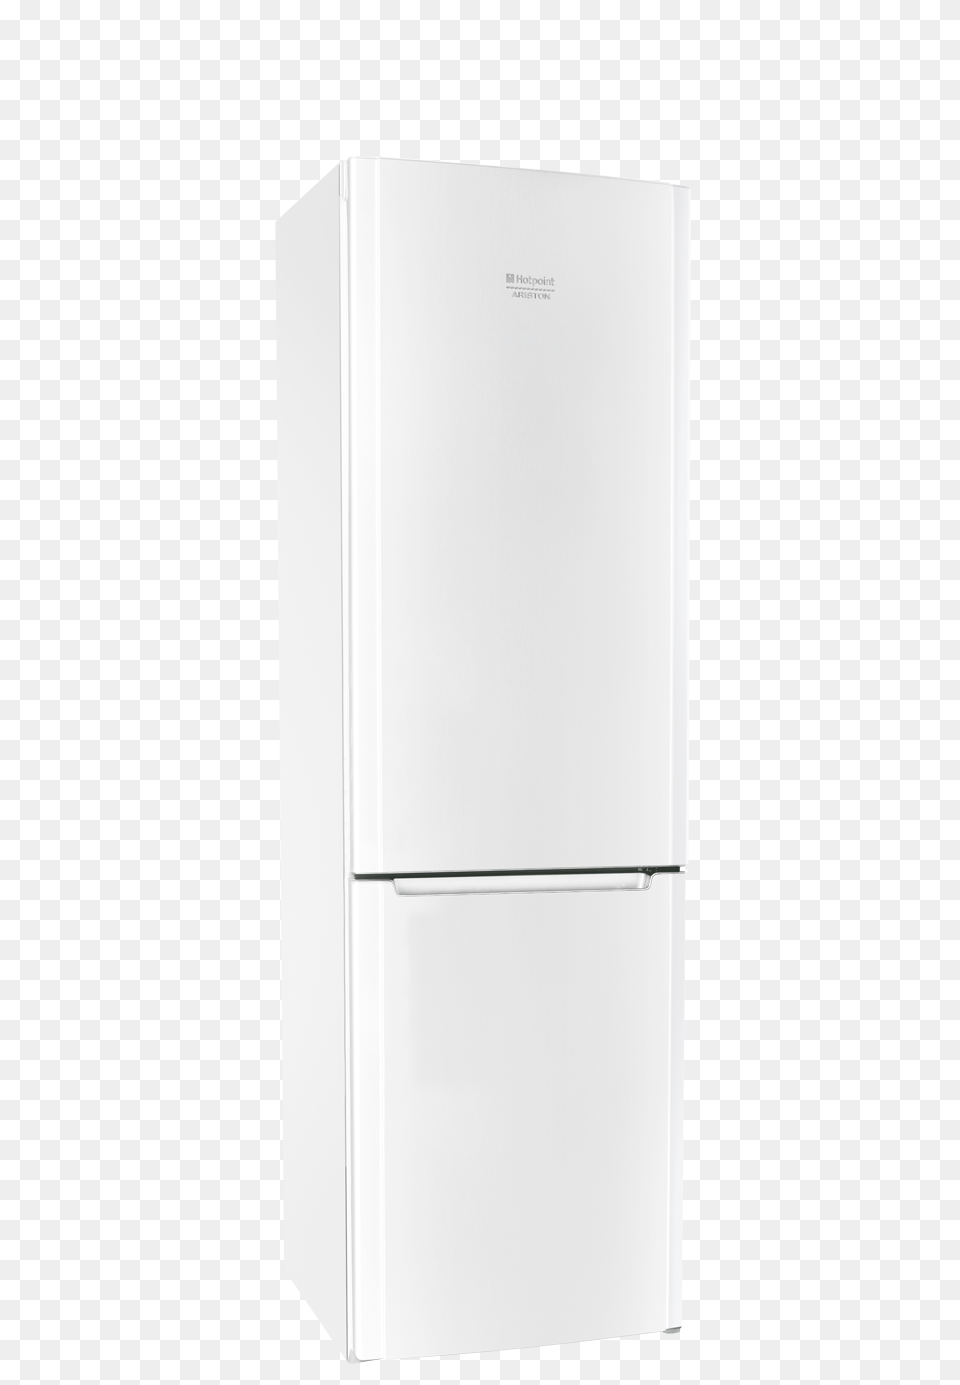 Refrigerator Images Download, Appliance, Device, Electrical Device Png Image